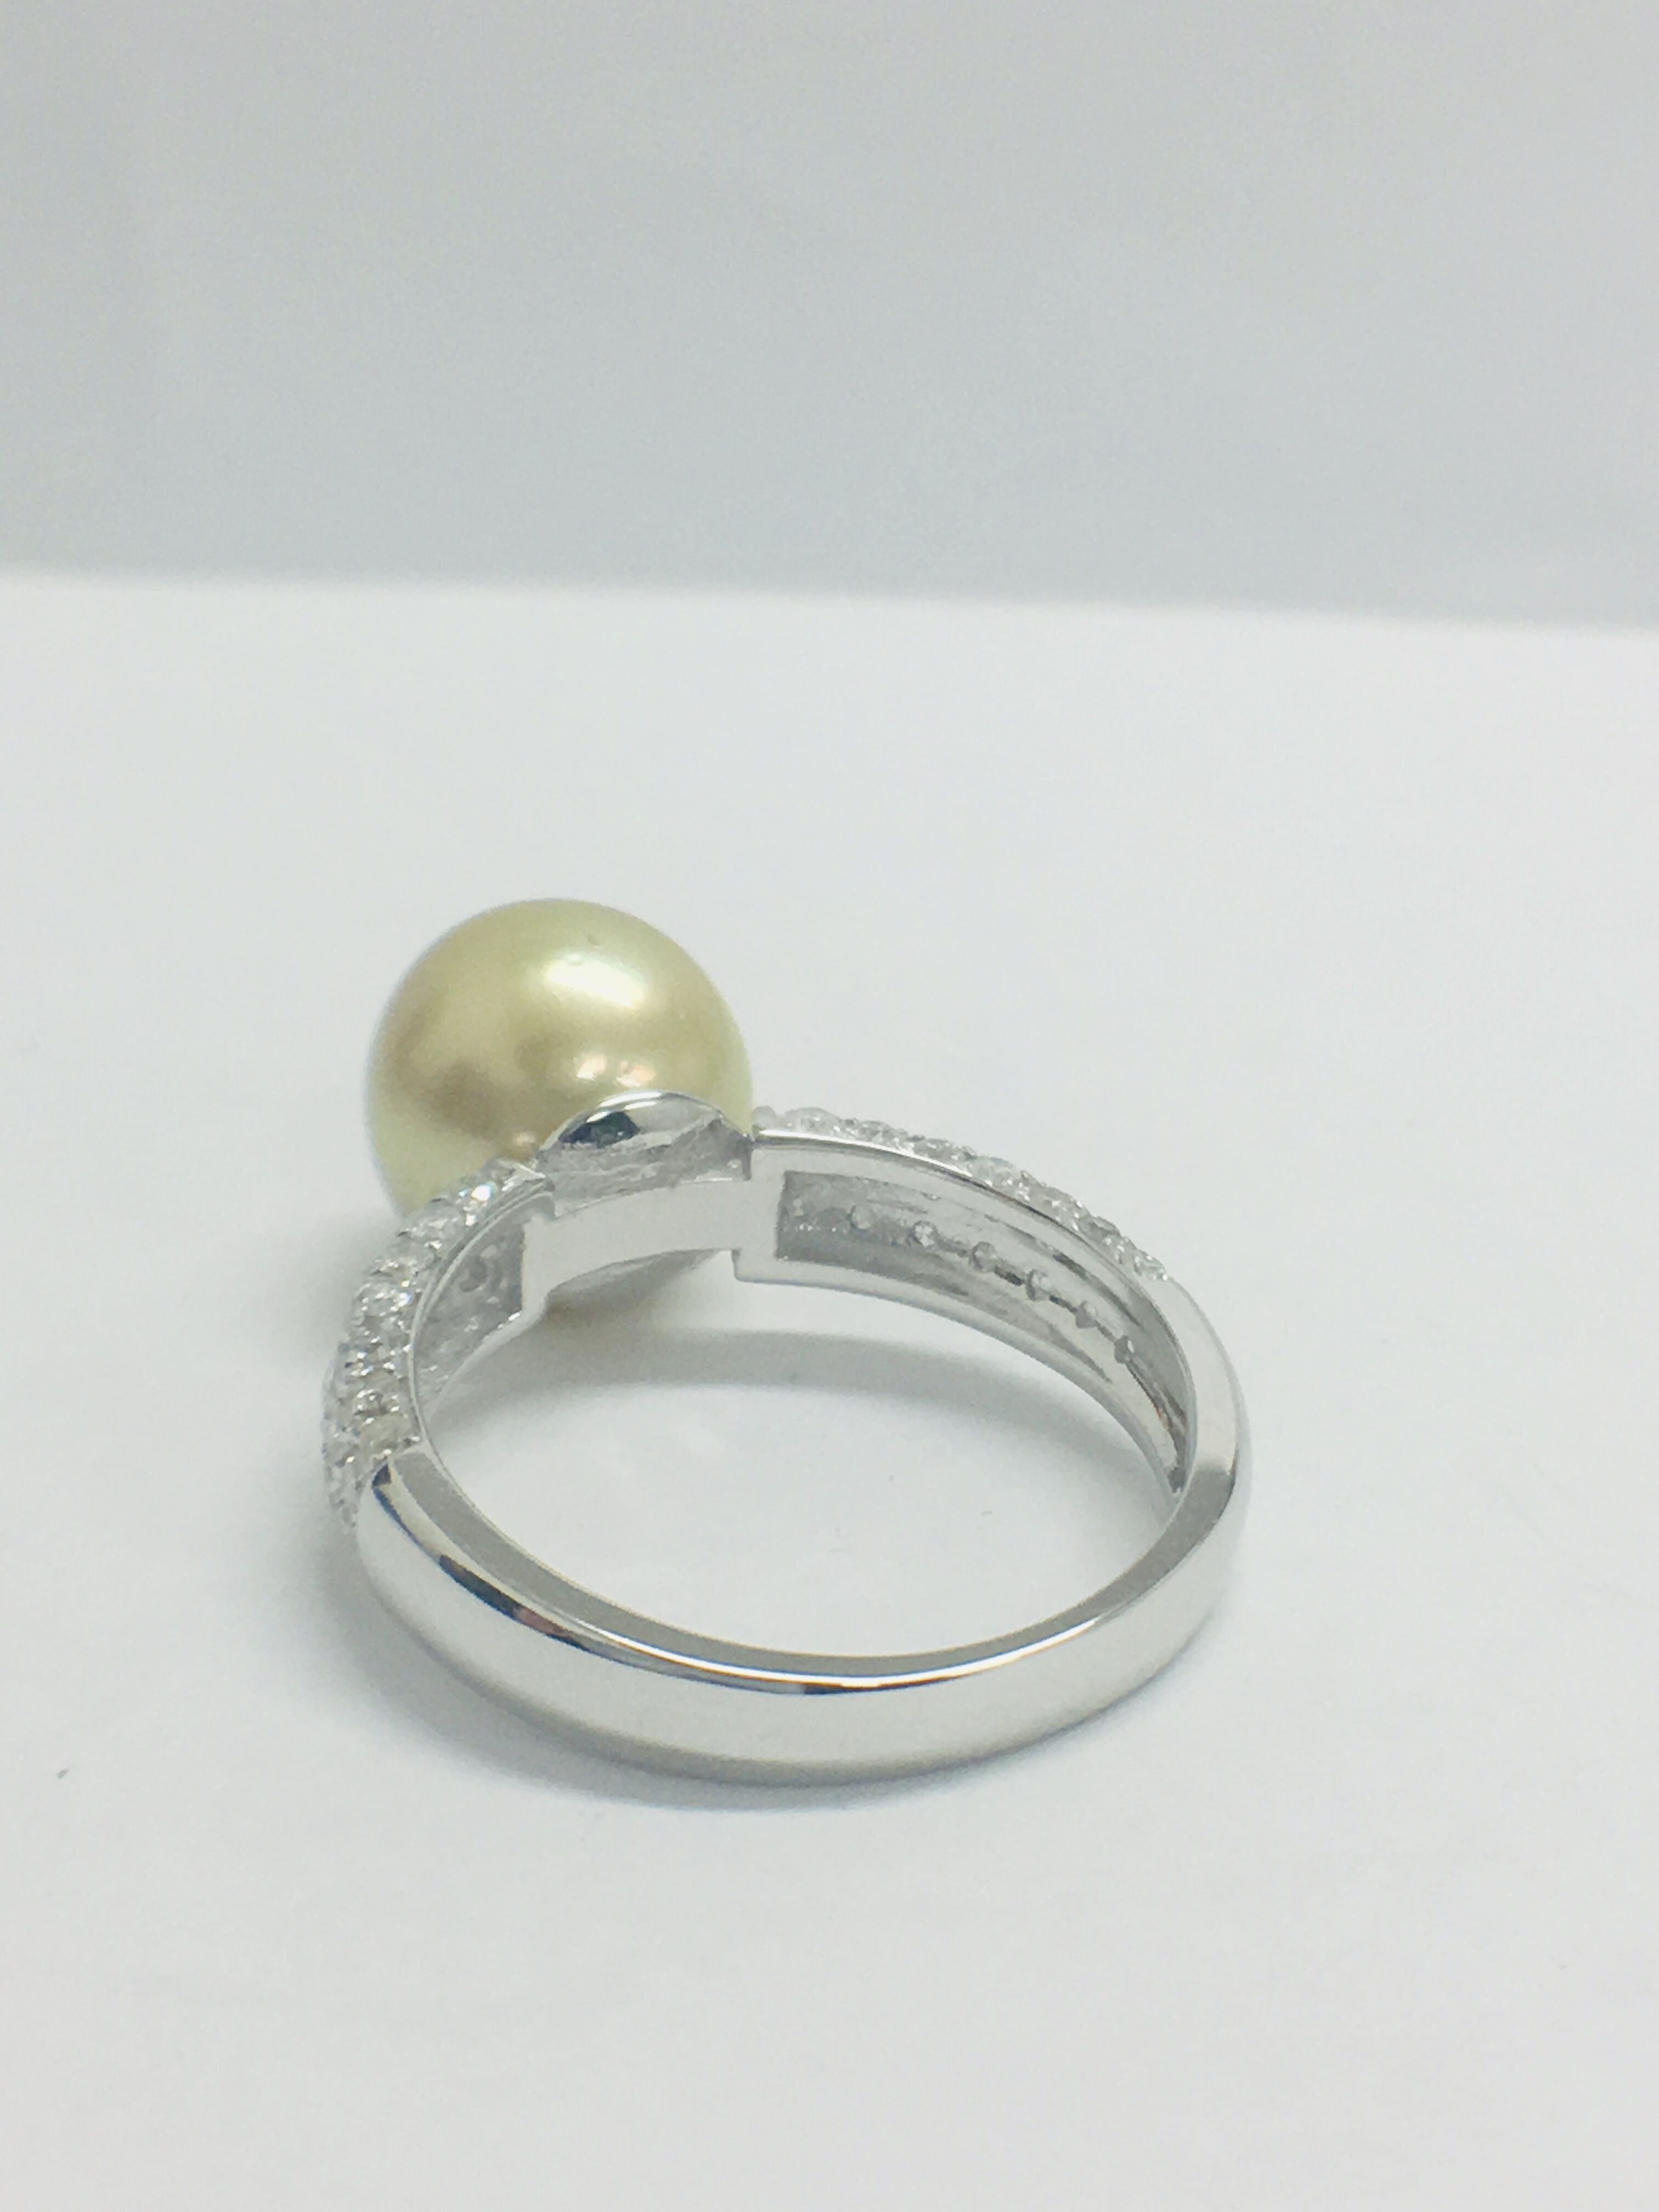 14Ct White Gold Pearl & Diamond Ring. - Image 6 of 11